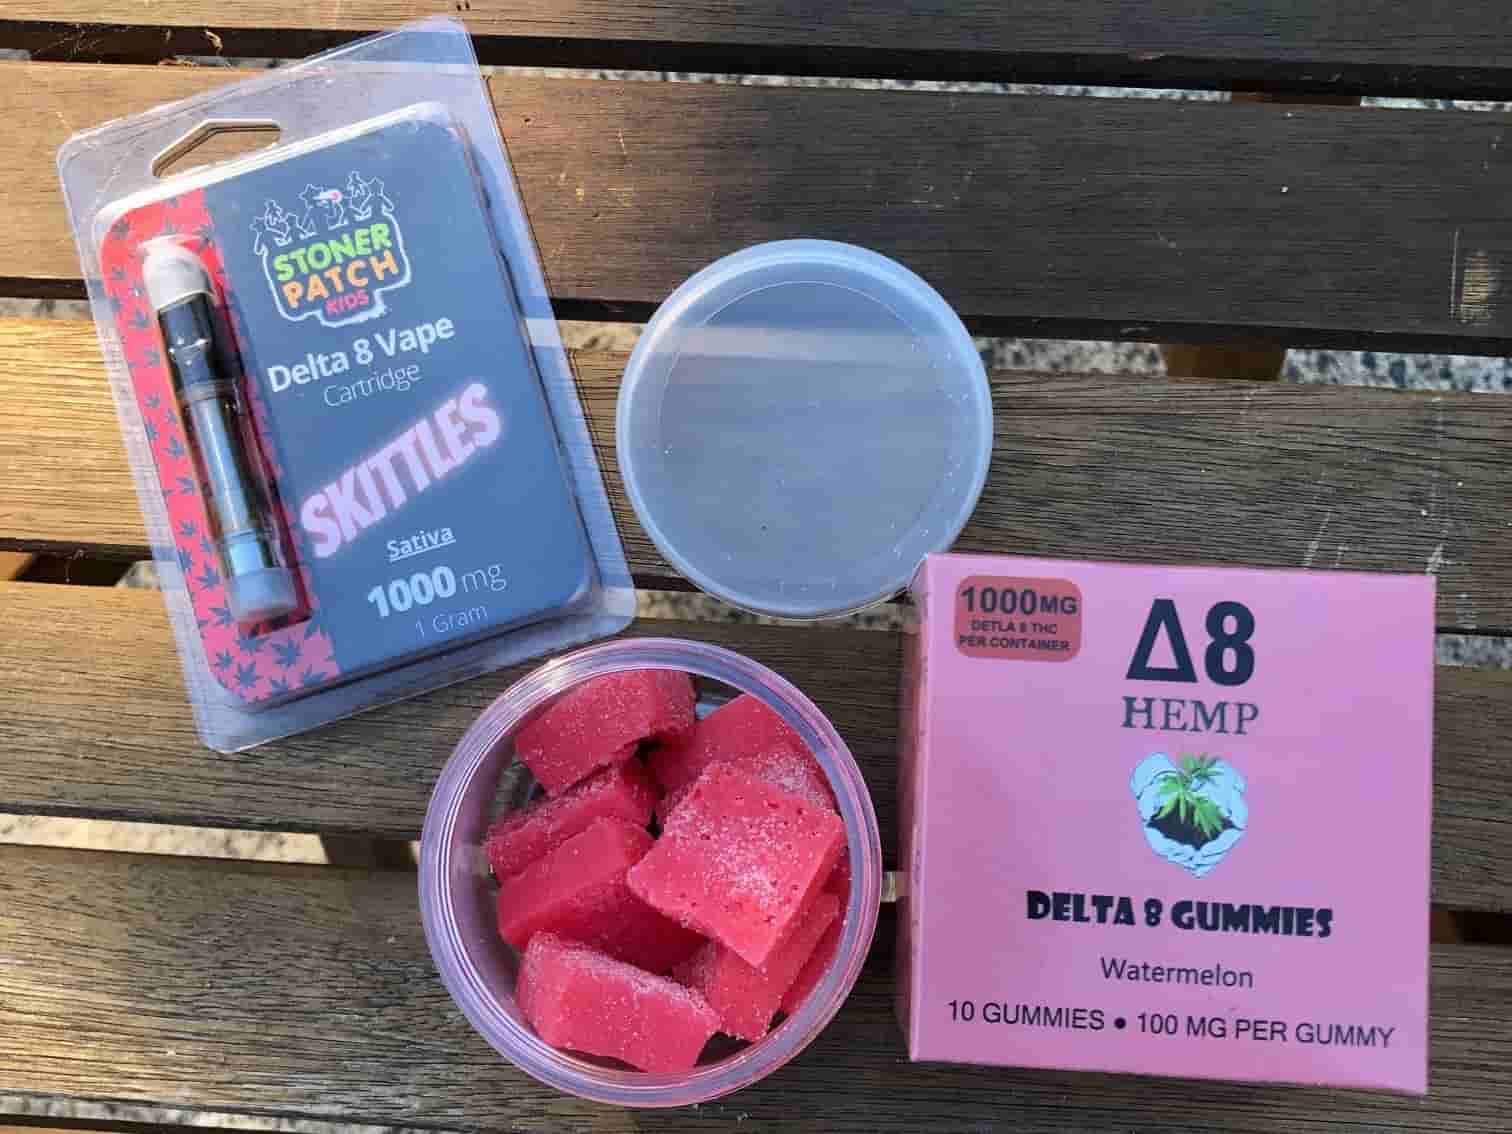 WEBMD DELTA 8 - Gummies|Thc|Products|Hemp|Product|Brand|Effects|Delta|Gummy|Cbd|Origin|Quality|Dosage|Delta-8|Dose|Usasource|Flavors|Brands|Ingredients|Range|Customers|Edibles|Cartridges|Reviews|Side|List|Health|Cannabis|Lab|Customer|Options|Benefits|Overviewproducts|Research|Time|Market|Drug|Farms|Party|People|Delta-8 Thc|Delta-8 Products|Delta-9 Thc|Delta-8 Gummies|Delta-8 Thc Products|Delta-8 Brands|Customer Reviews|Brand Overviewproducts|Drug Tests|Free Shipping|Similar Benefits|Vape Cartridges|Hemp Doctor|United States|Third Party Lab|Drug Test|Thc Edibles|Health Canada|Cannabis Plant|Side Effects|Organic Hemp|Diamond Cbd|Reaction Time|Legal Hemp|Psychoactive Effects|Psychoactive Properties|Third Party|Dry Eyes|Delta-8 Market|Tolerance Level